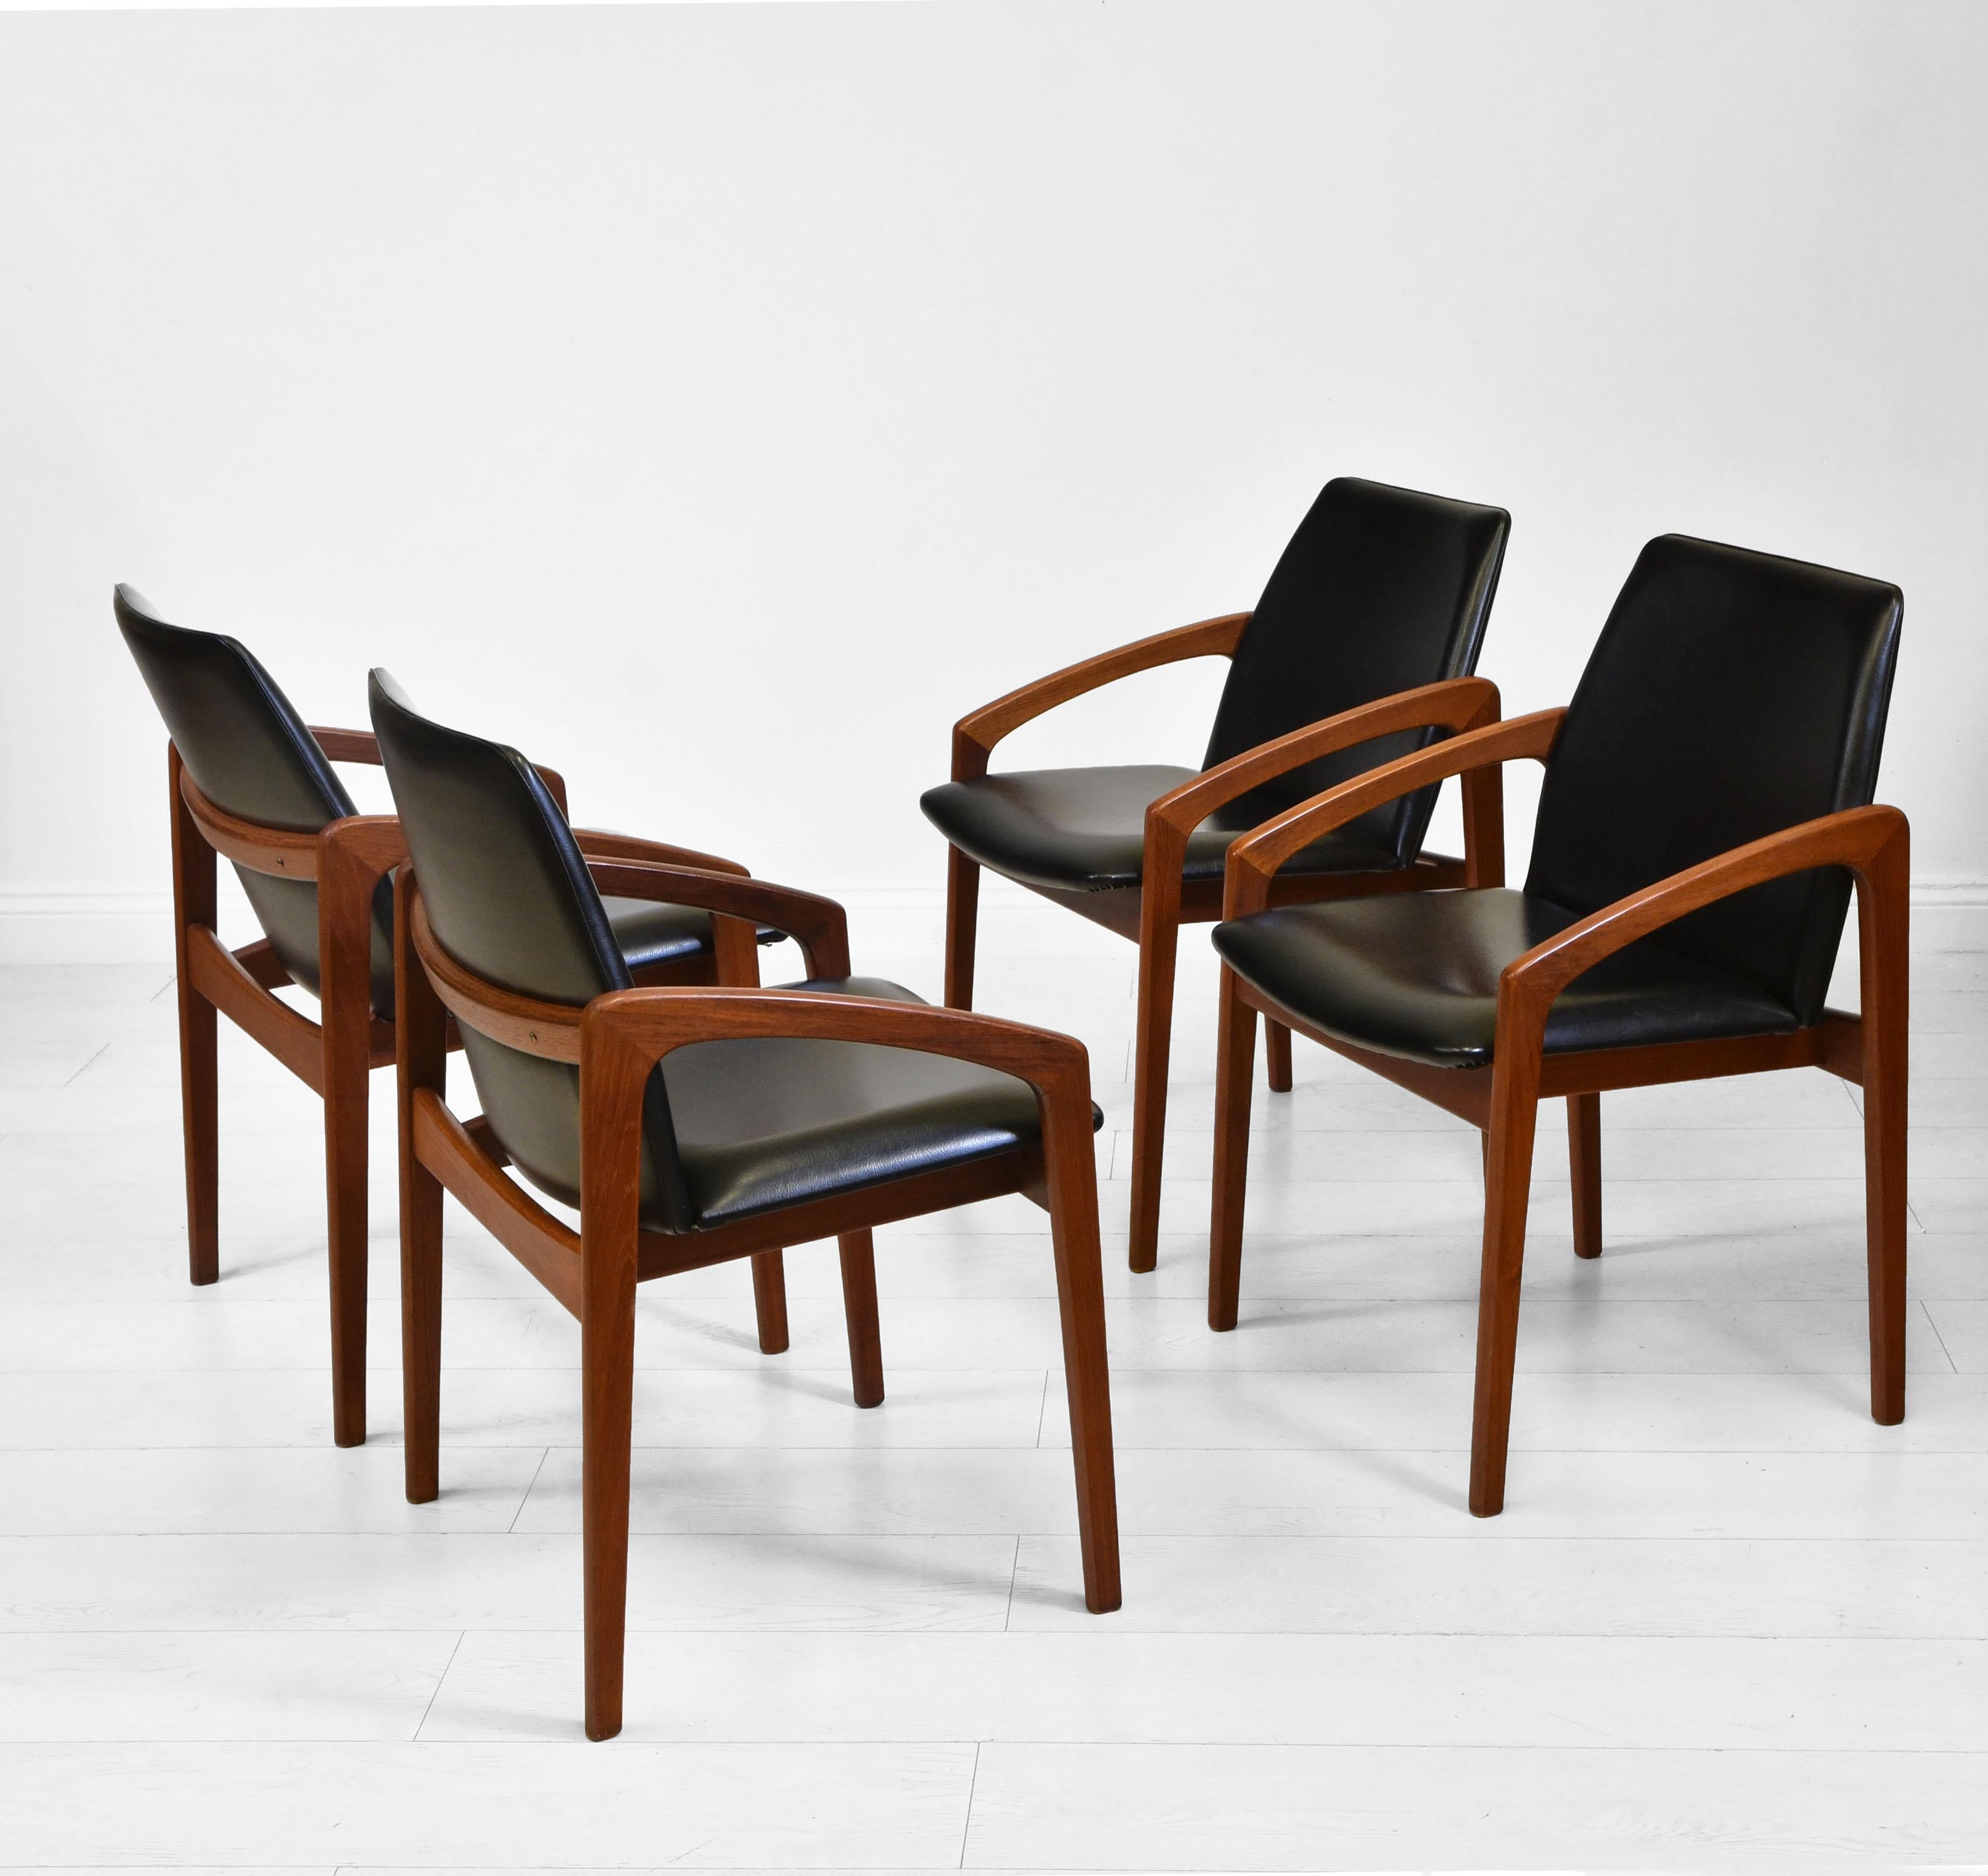 A stylish set of four Danish dining chairs designed by Henning Kjaernulf for Korup Stolefabrik. Circa 1960.

The chairs have solid teak frames with the original black vinyl seating. The seating is in very good condition, no rips or tears, and is